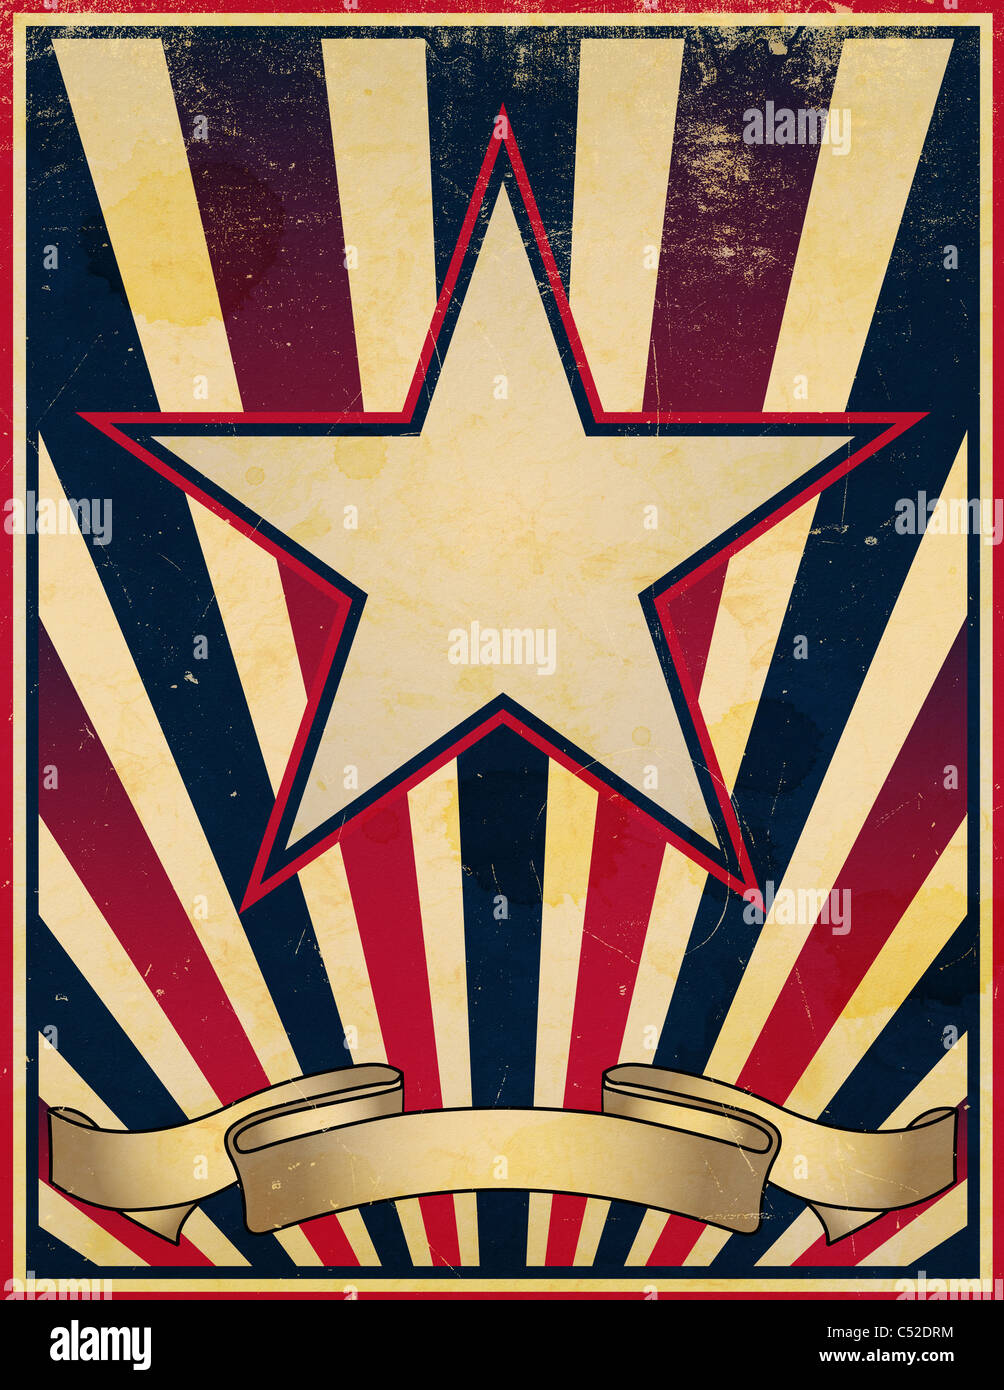 A damaged, worn and faded stars and stripes themed vintage retro poster  background Stock Photo - Alamy